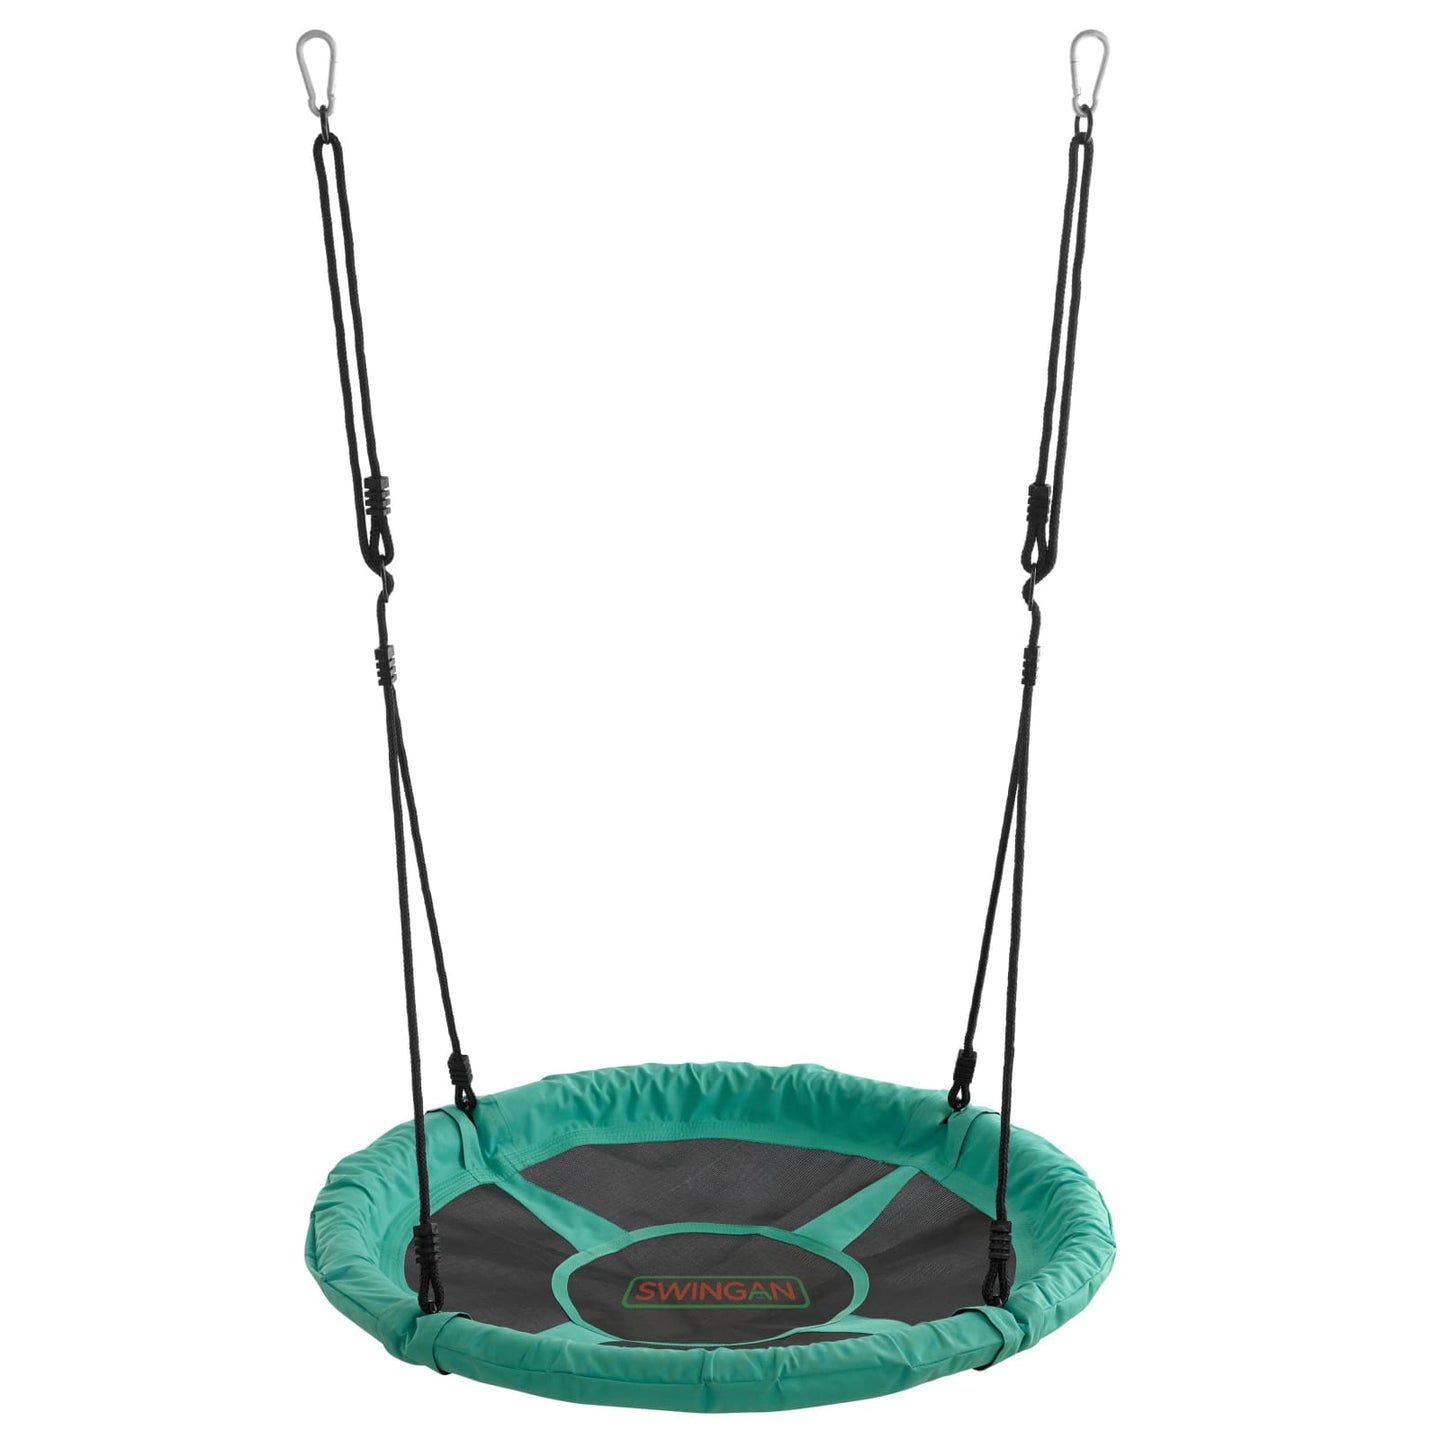 Swingan - 37.5 Super Fun Nest Swing With Adjustable Ropes - Green - Swmsg - Swings & Accessories